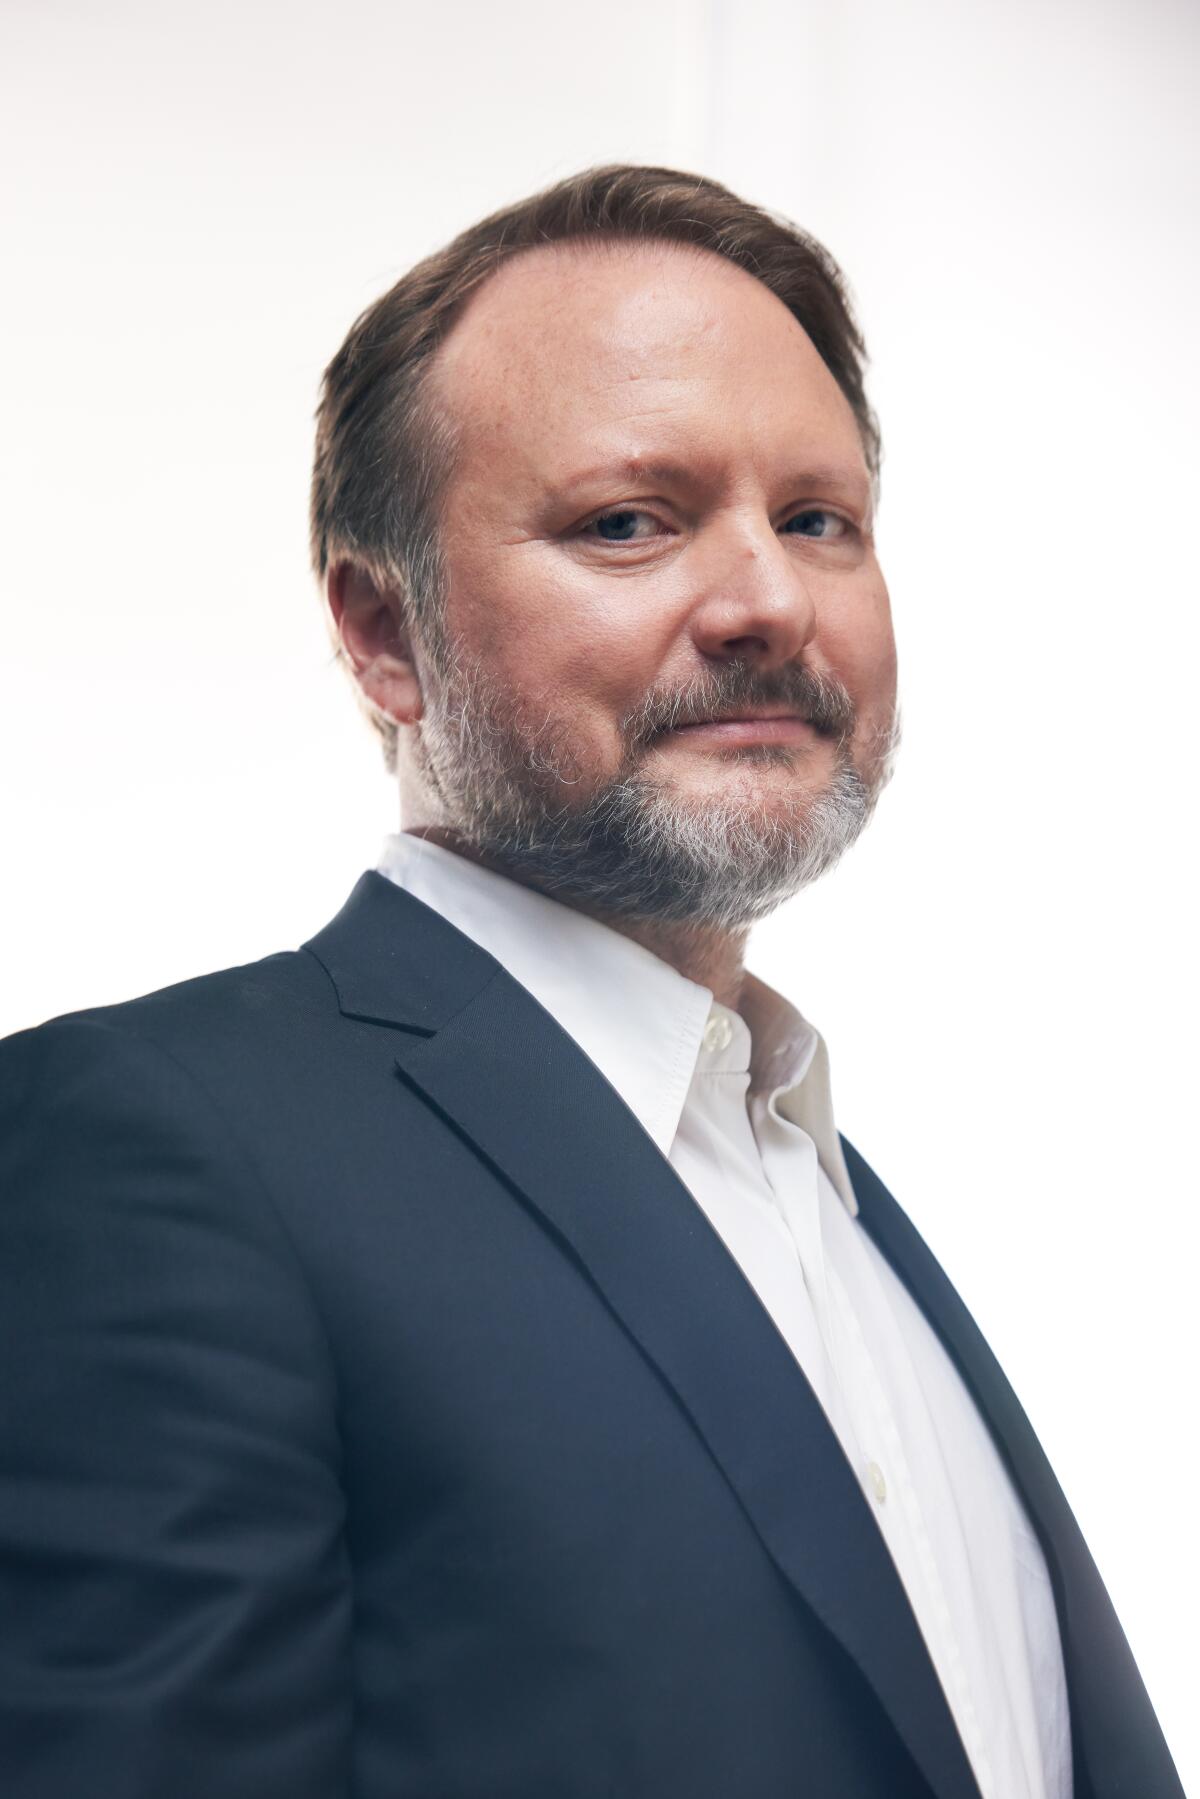 Rian Johnson in a dark suit jacket looks into the camera for a portrait.